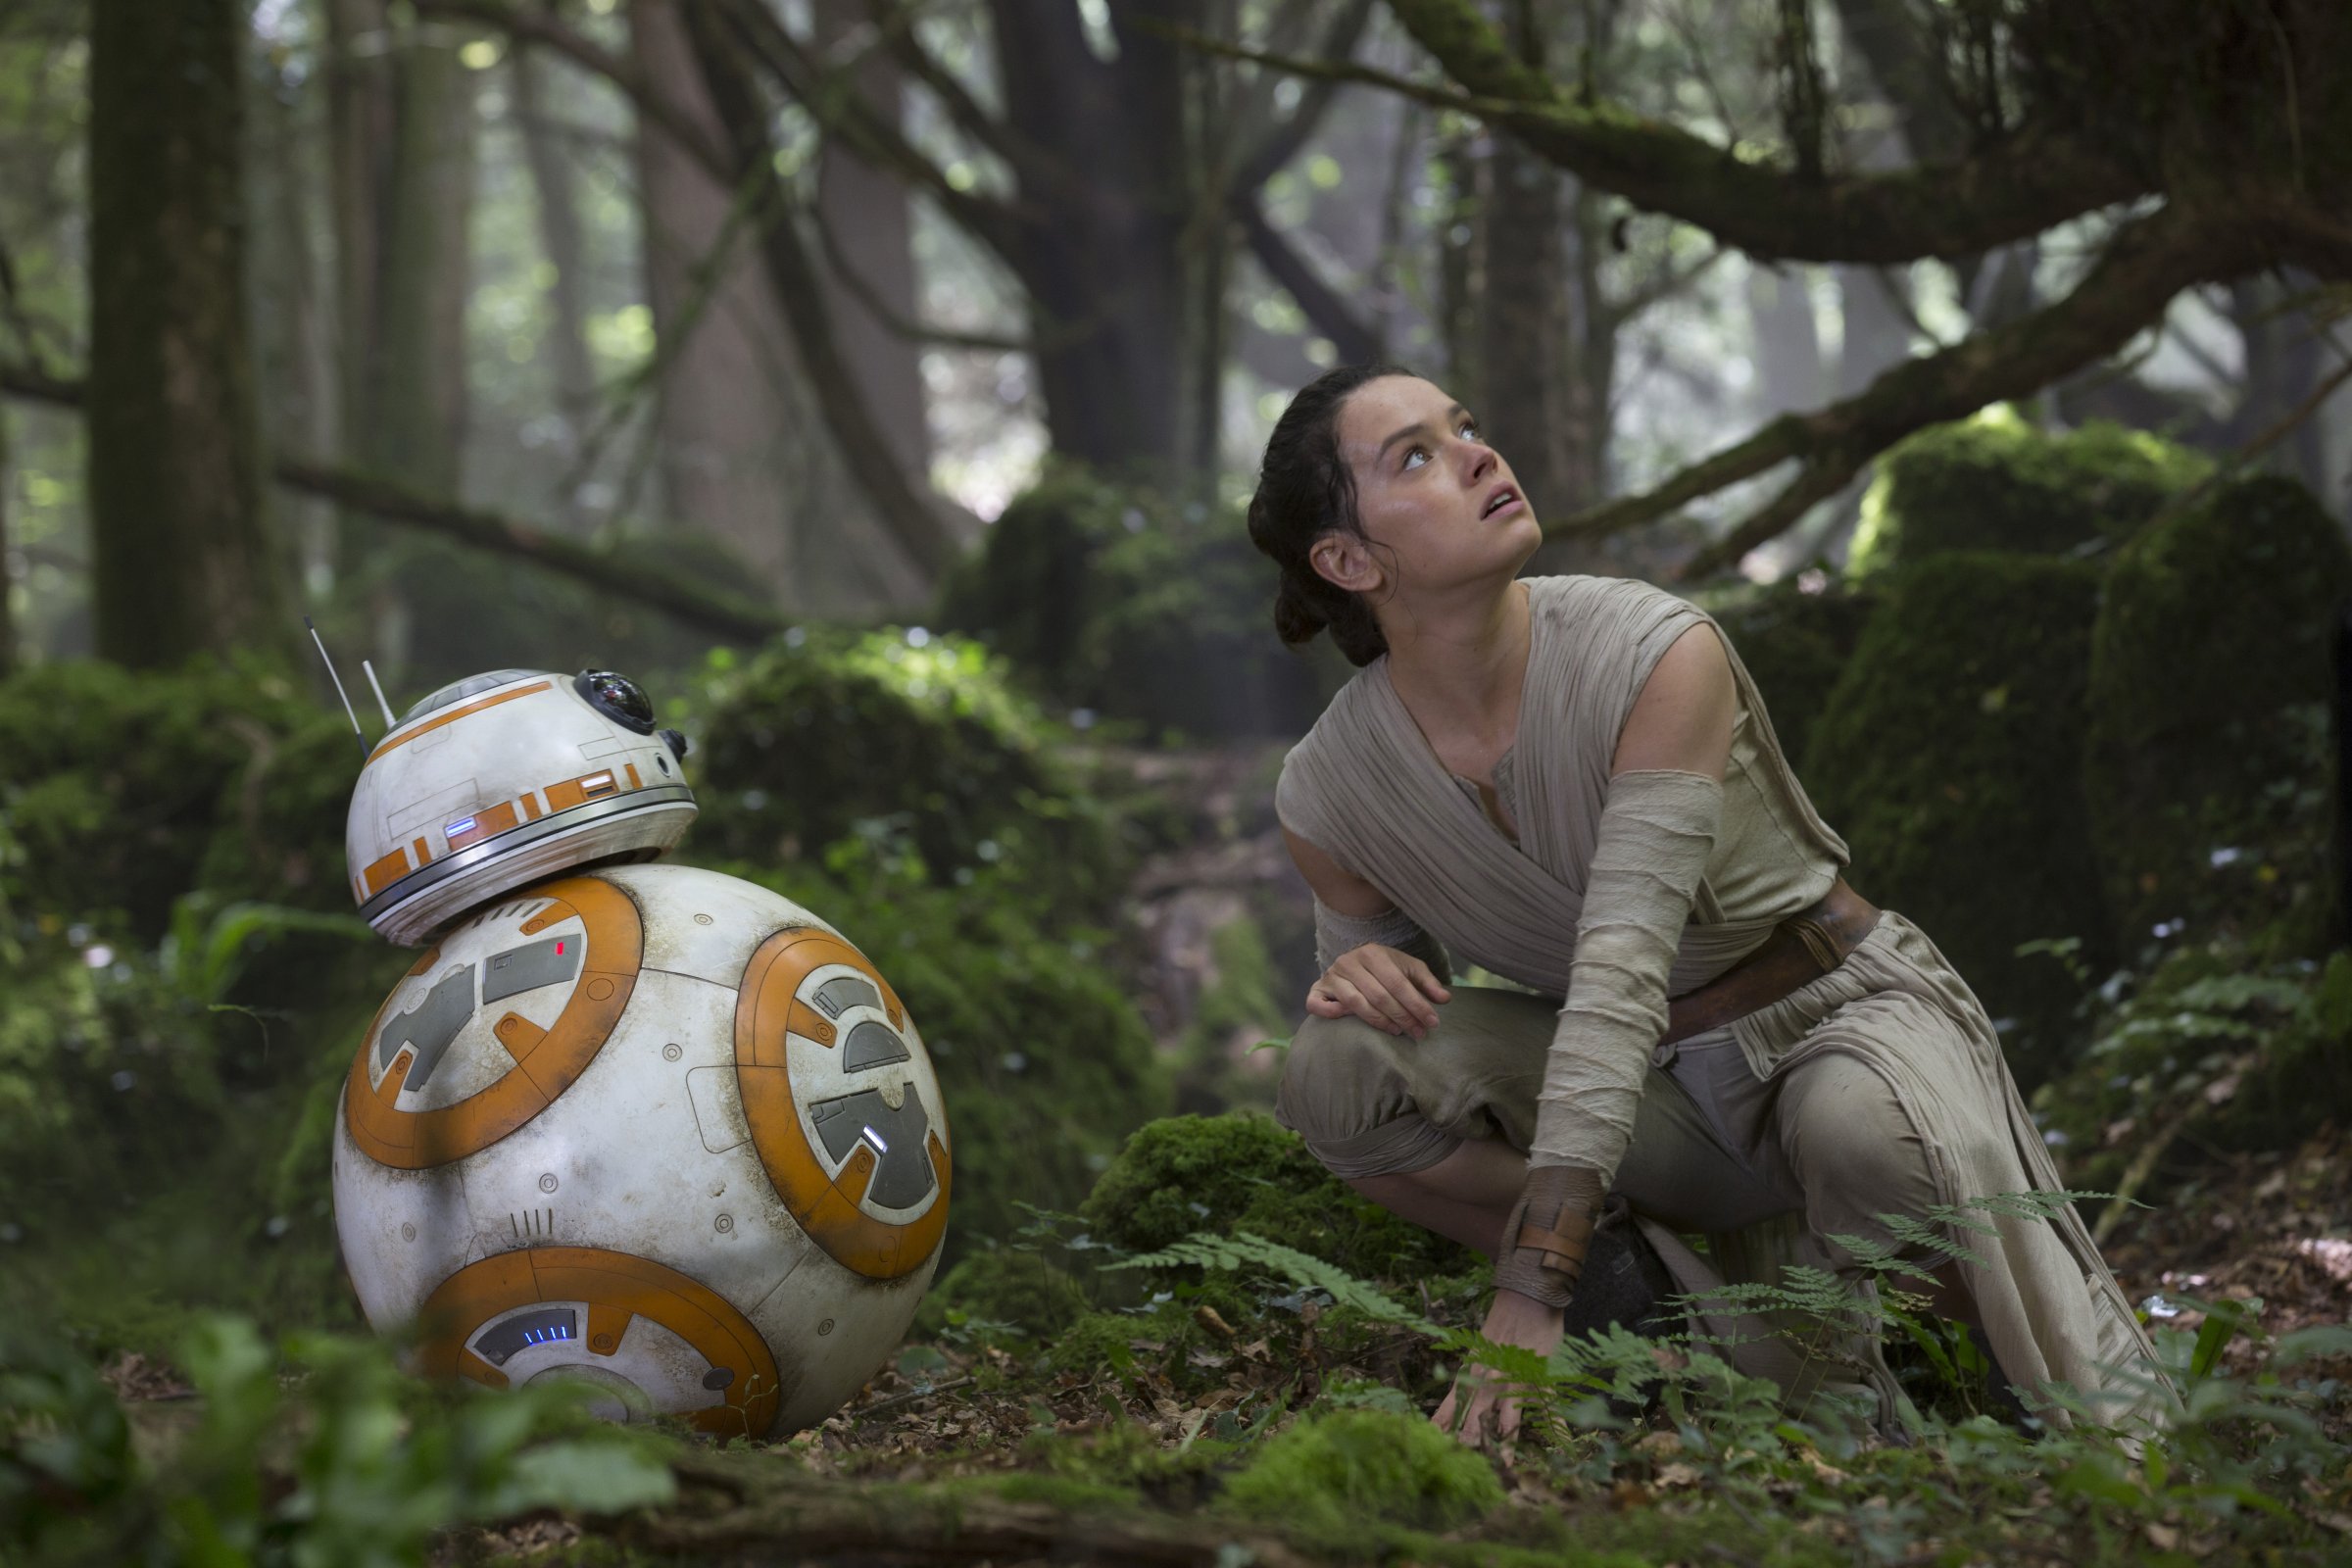 Star Wars: The Force AwakensL to R: BB-8 and Rey (Daisy Ridley)Ph: David James© 2015 Lucasfilm Ltd. &amp; TM. All Right Reserved.